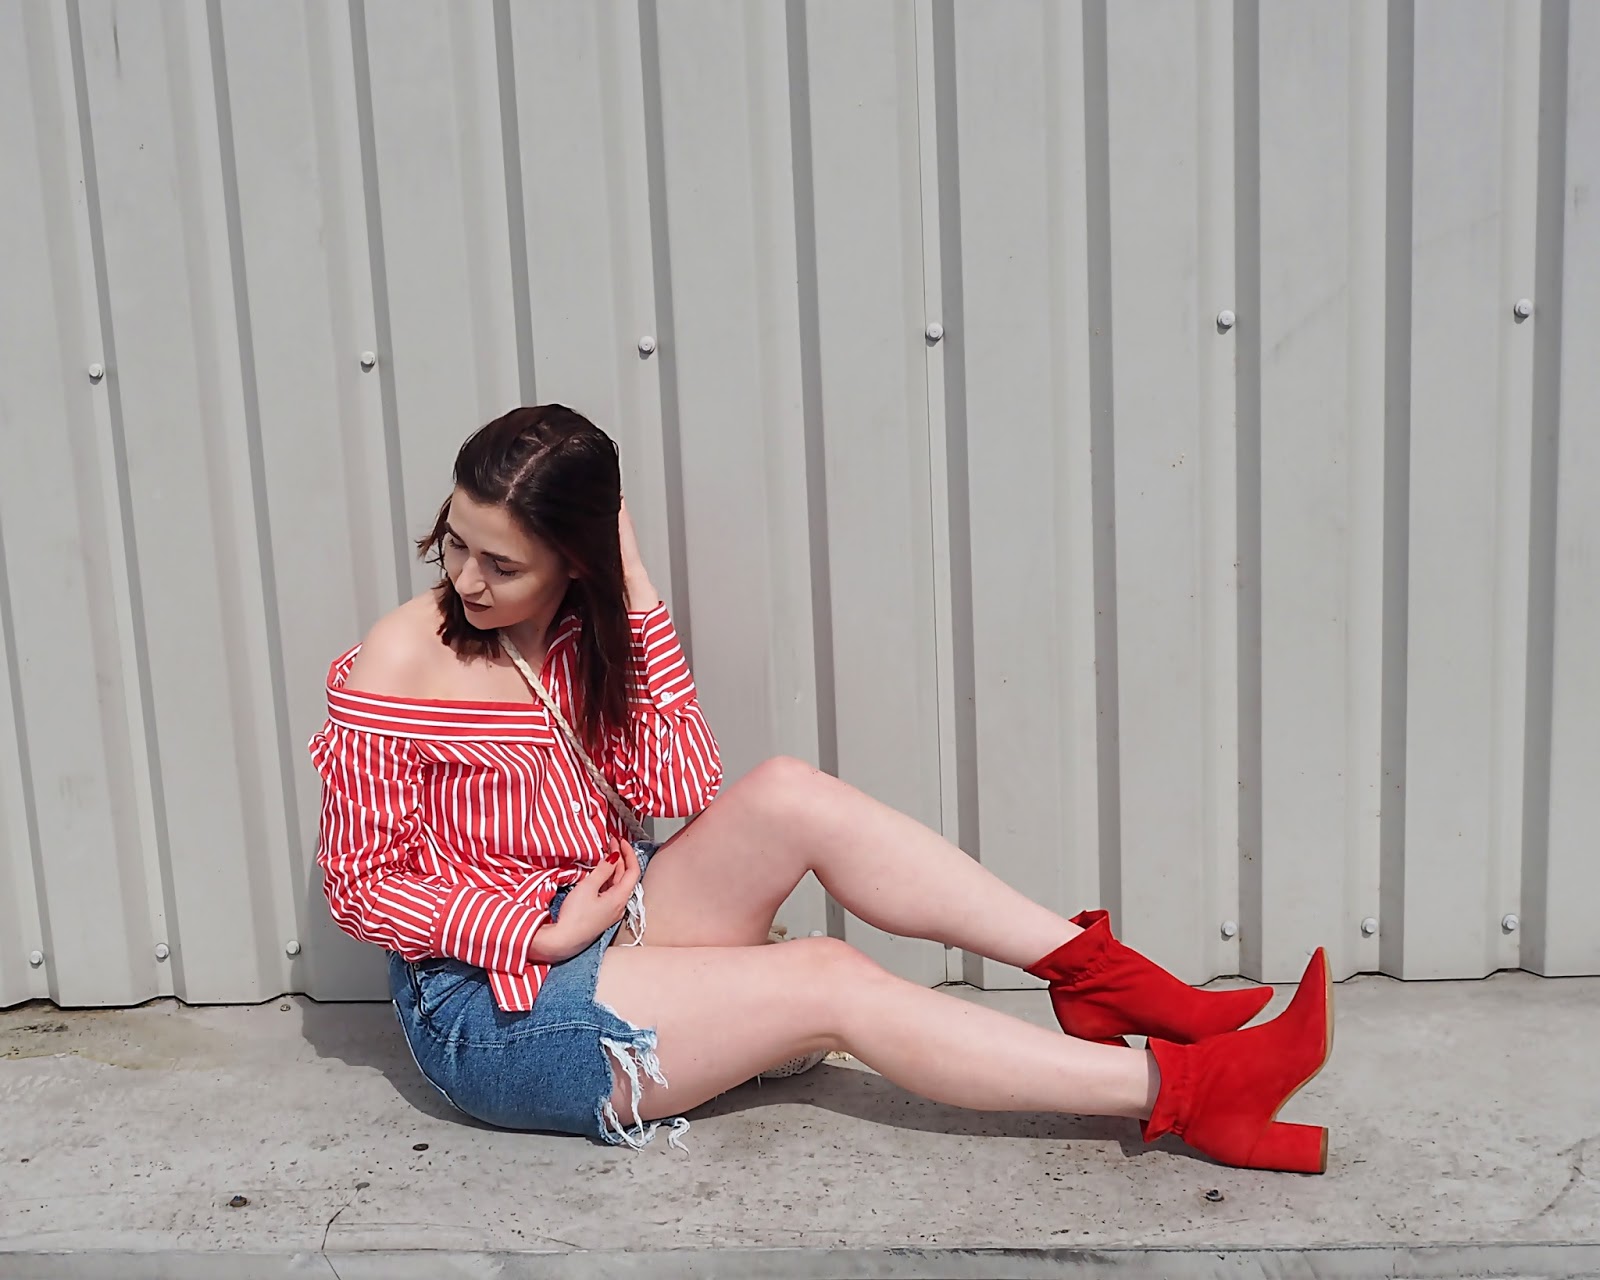 red shirt and boots sitting